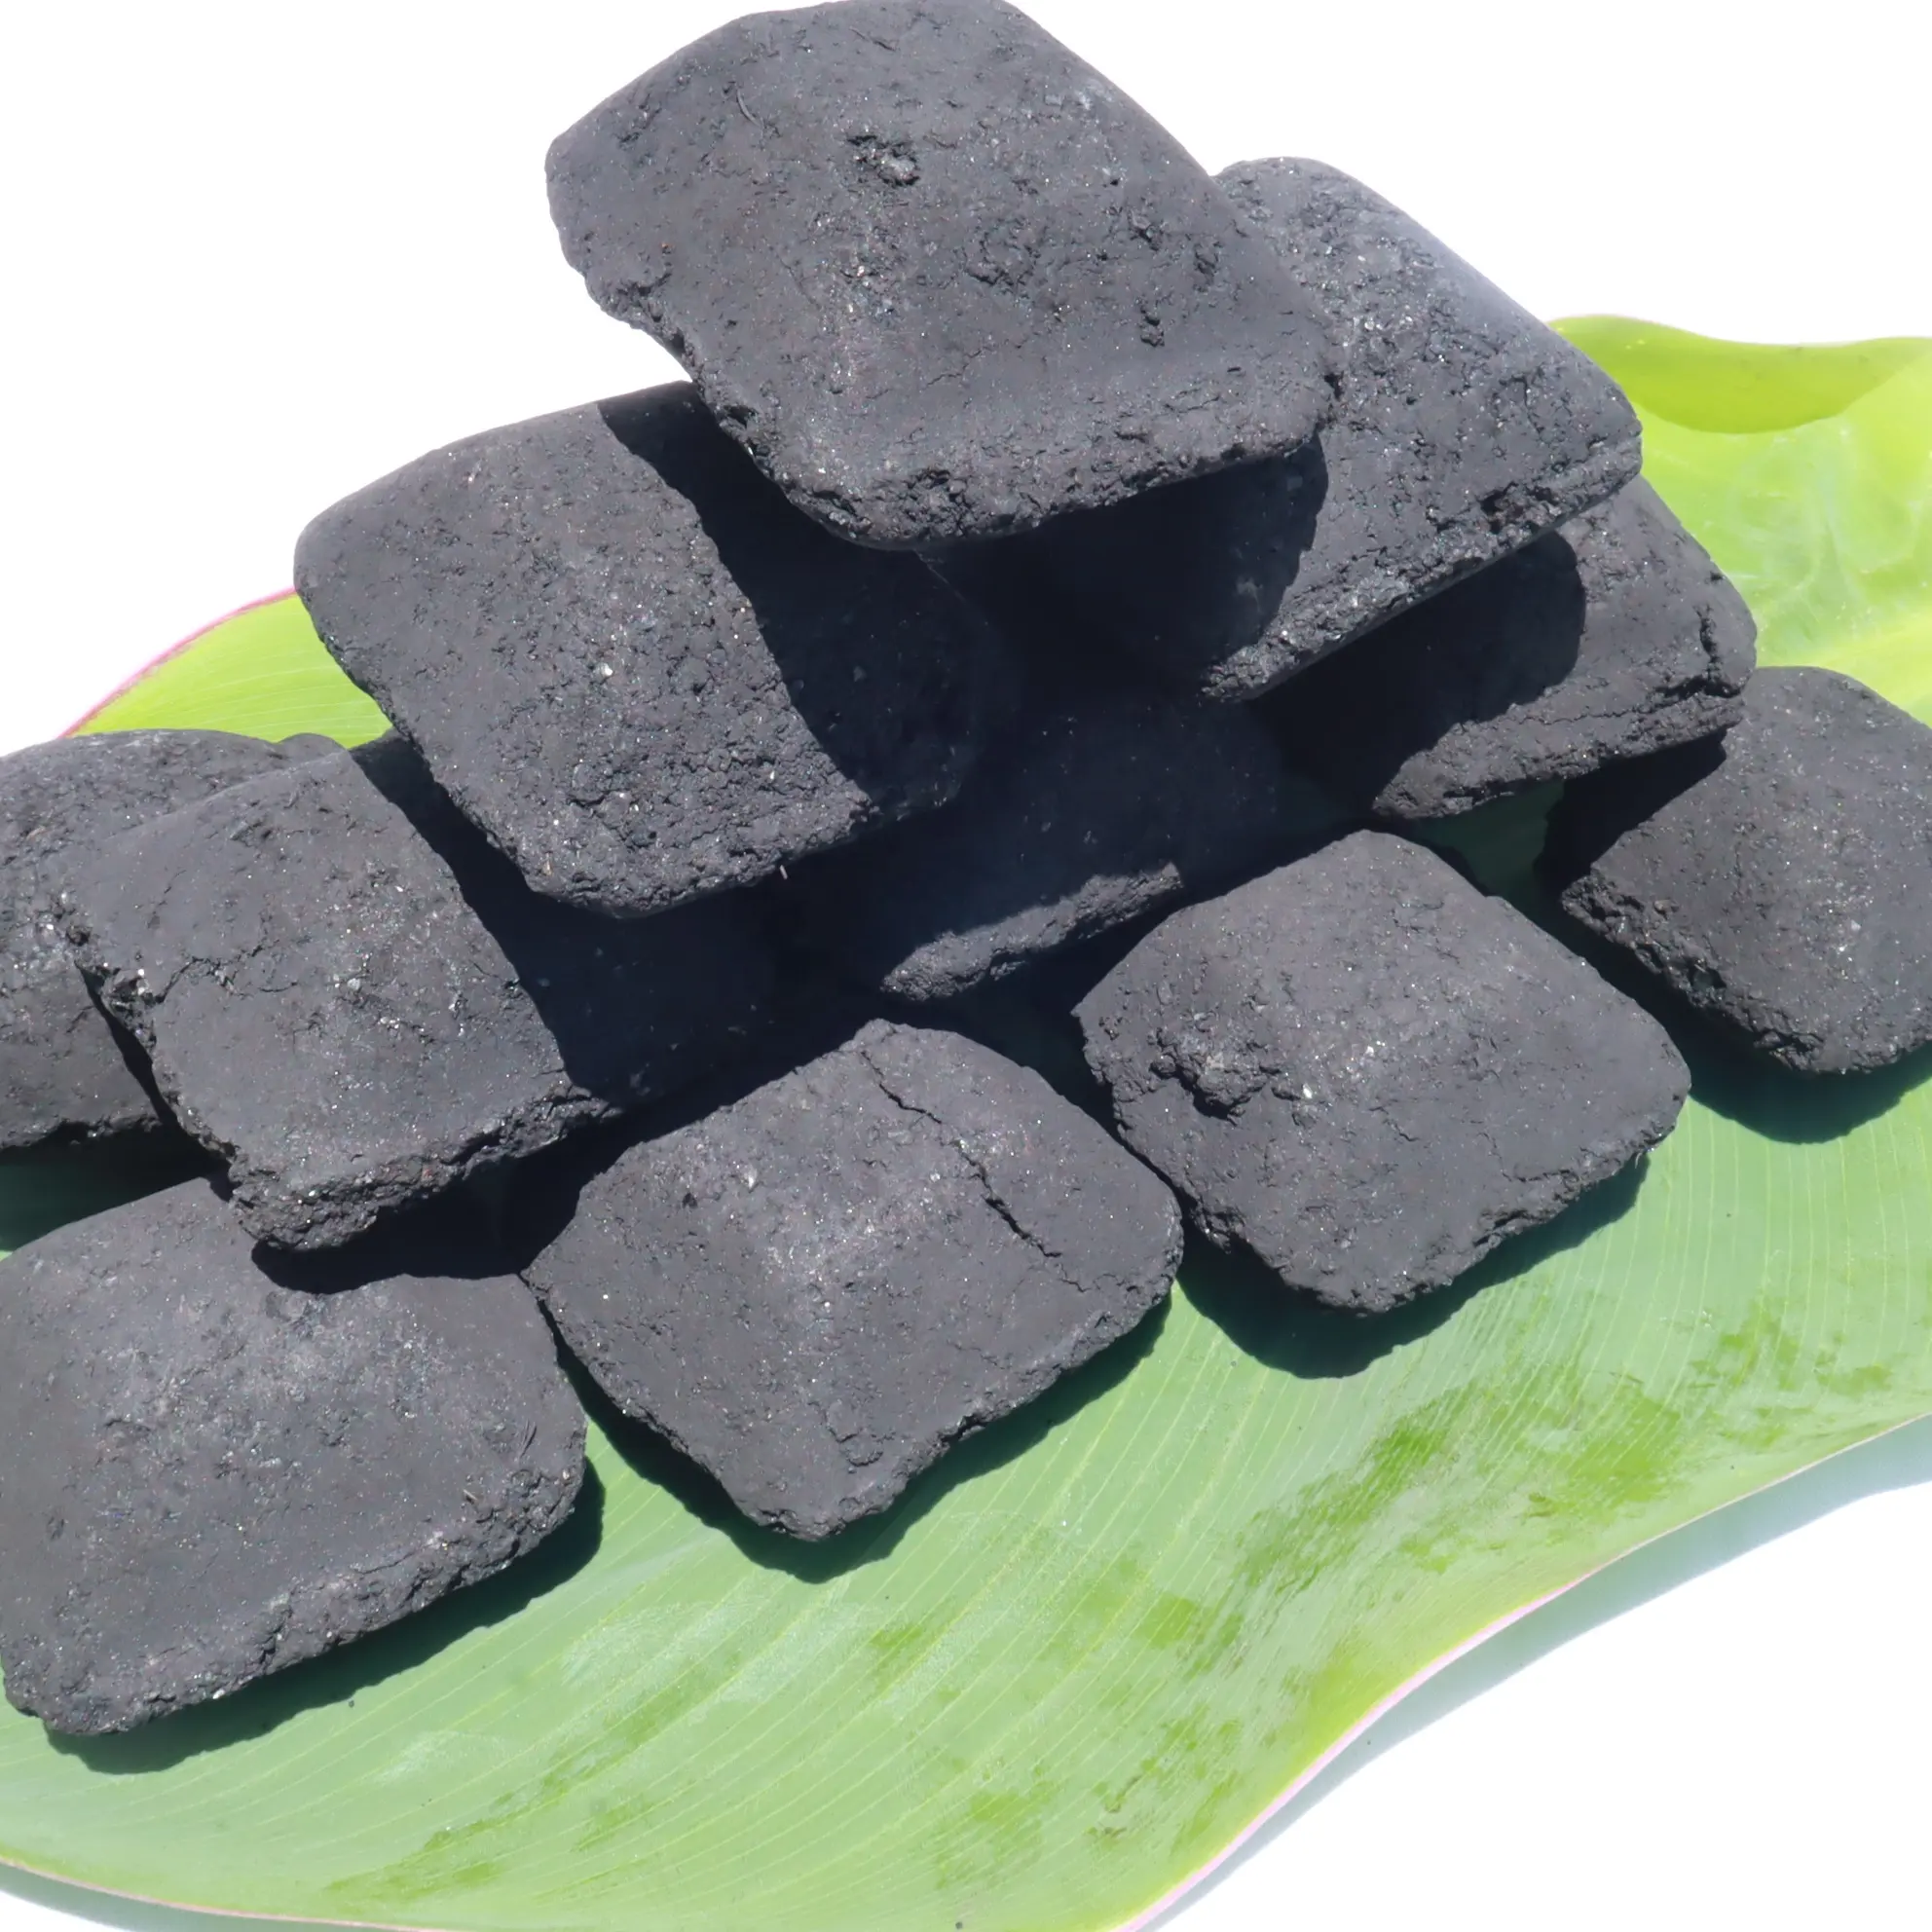 Super Top Factory Customised Quality And Minimum Order Quantity (MOQ) Coconut Charcoal Briquettes Barbecue Home Applications